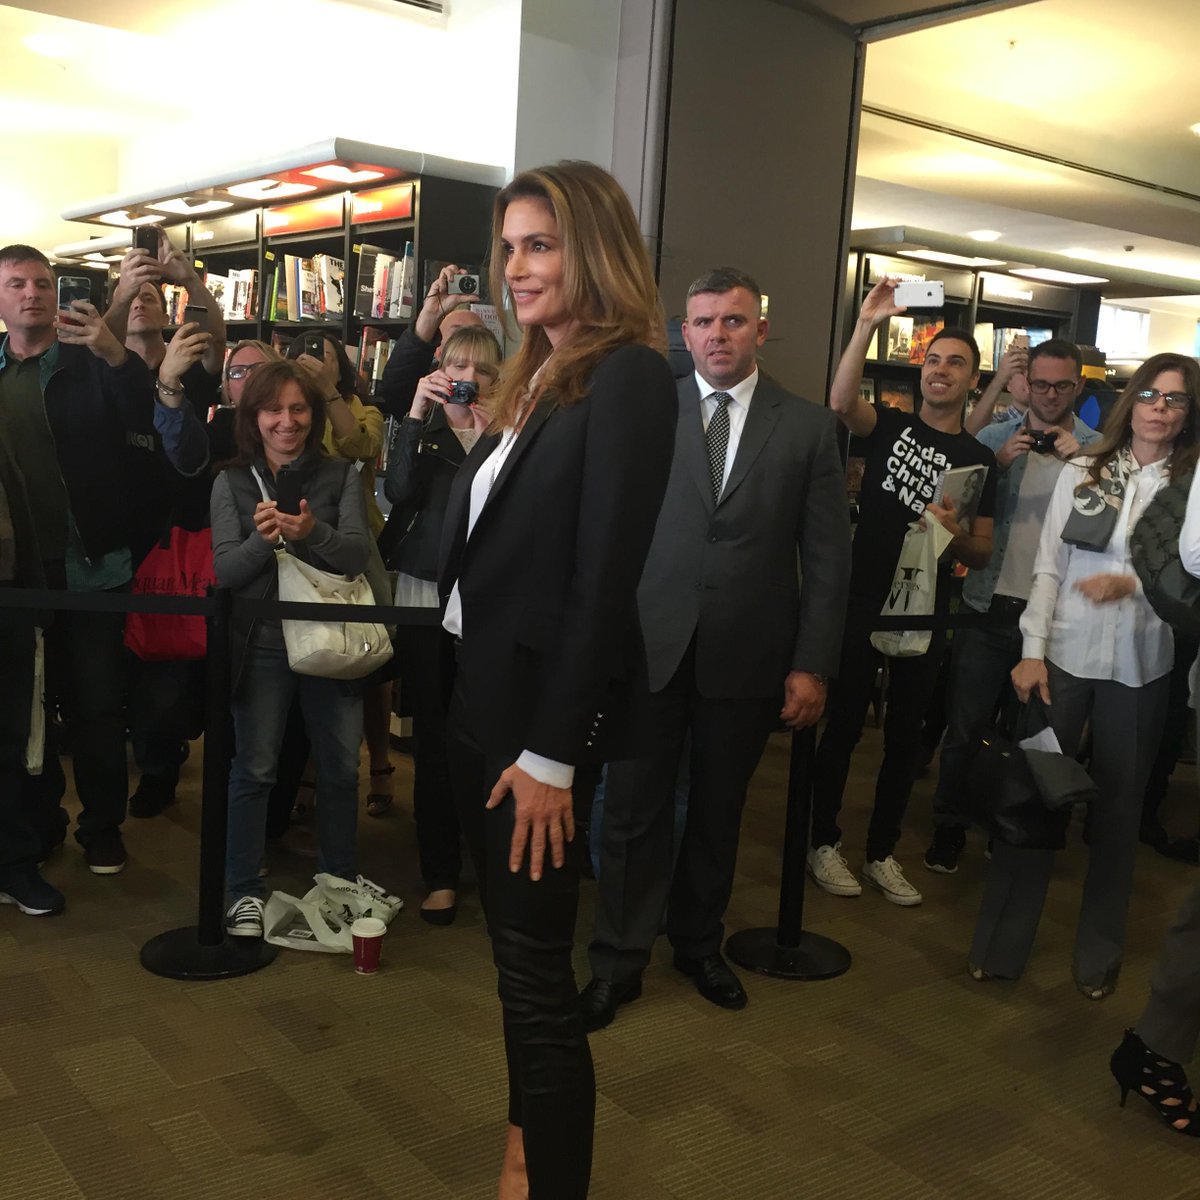 RT @Waterstones: Delighted to welcome @CindyCrawford to @WaterstonesPicc! http://t.co/zFrpXBaMmr